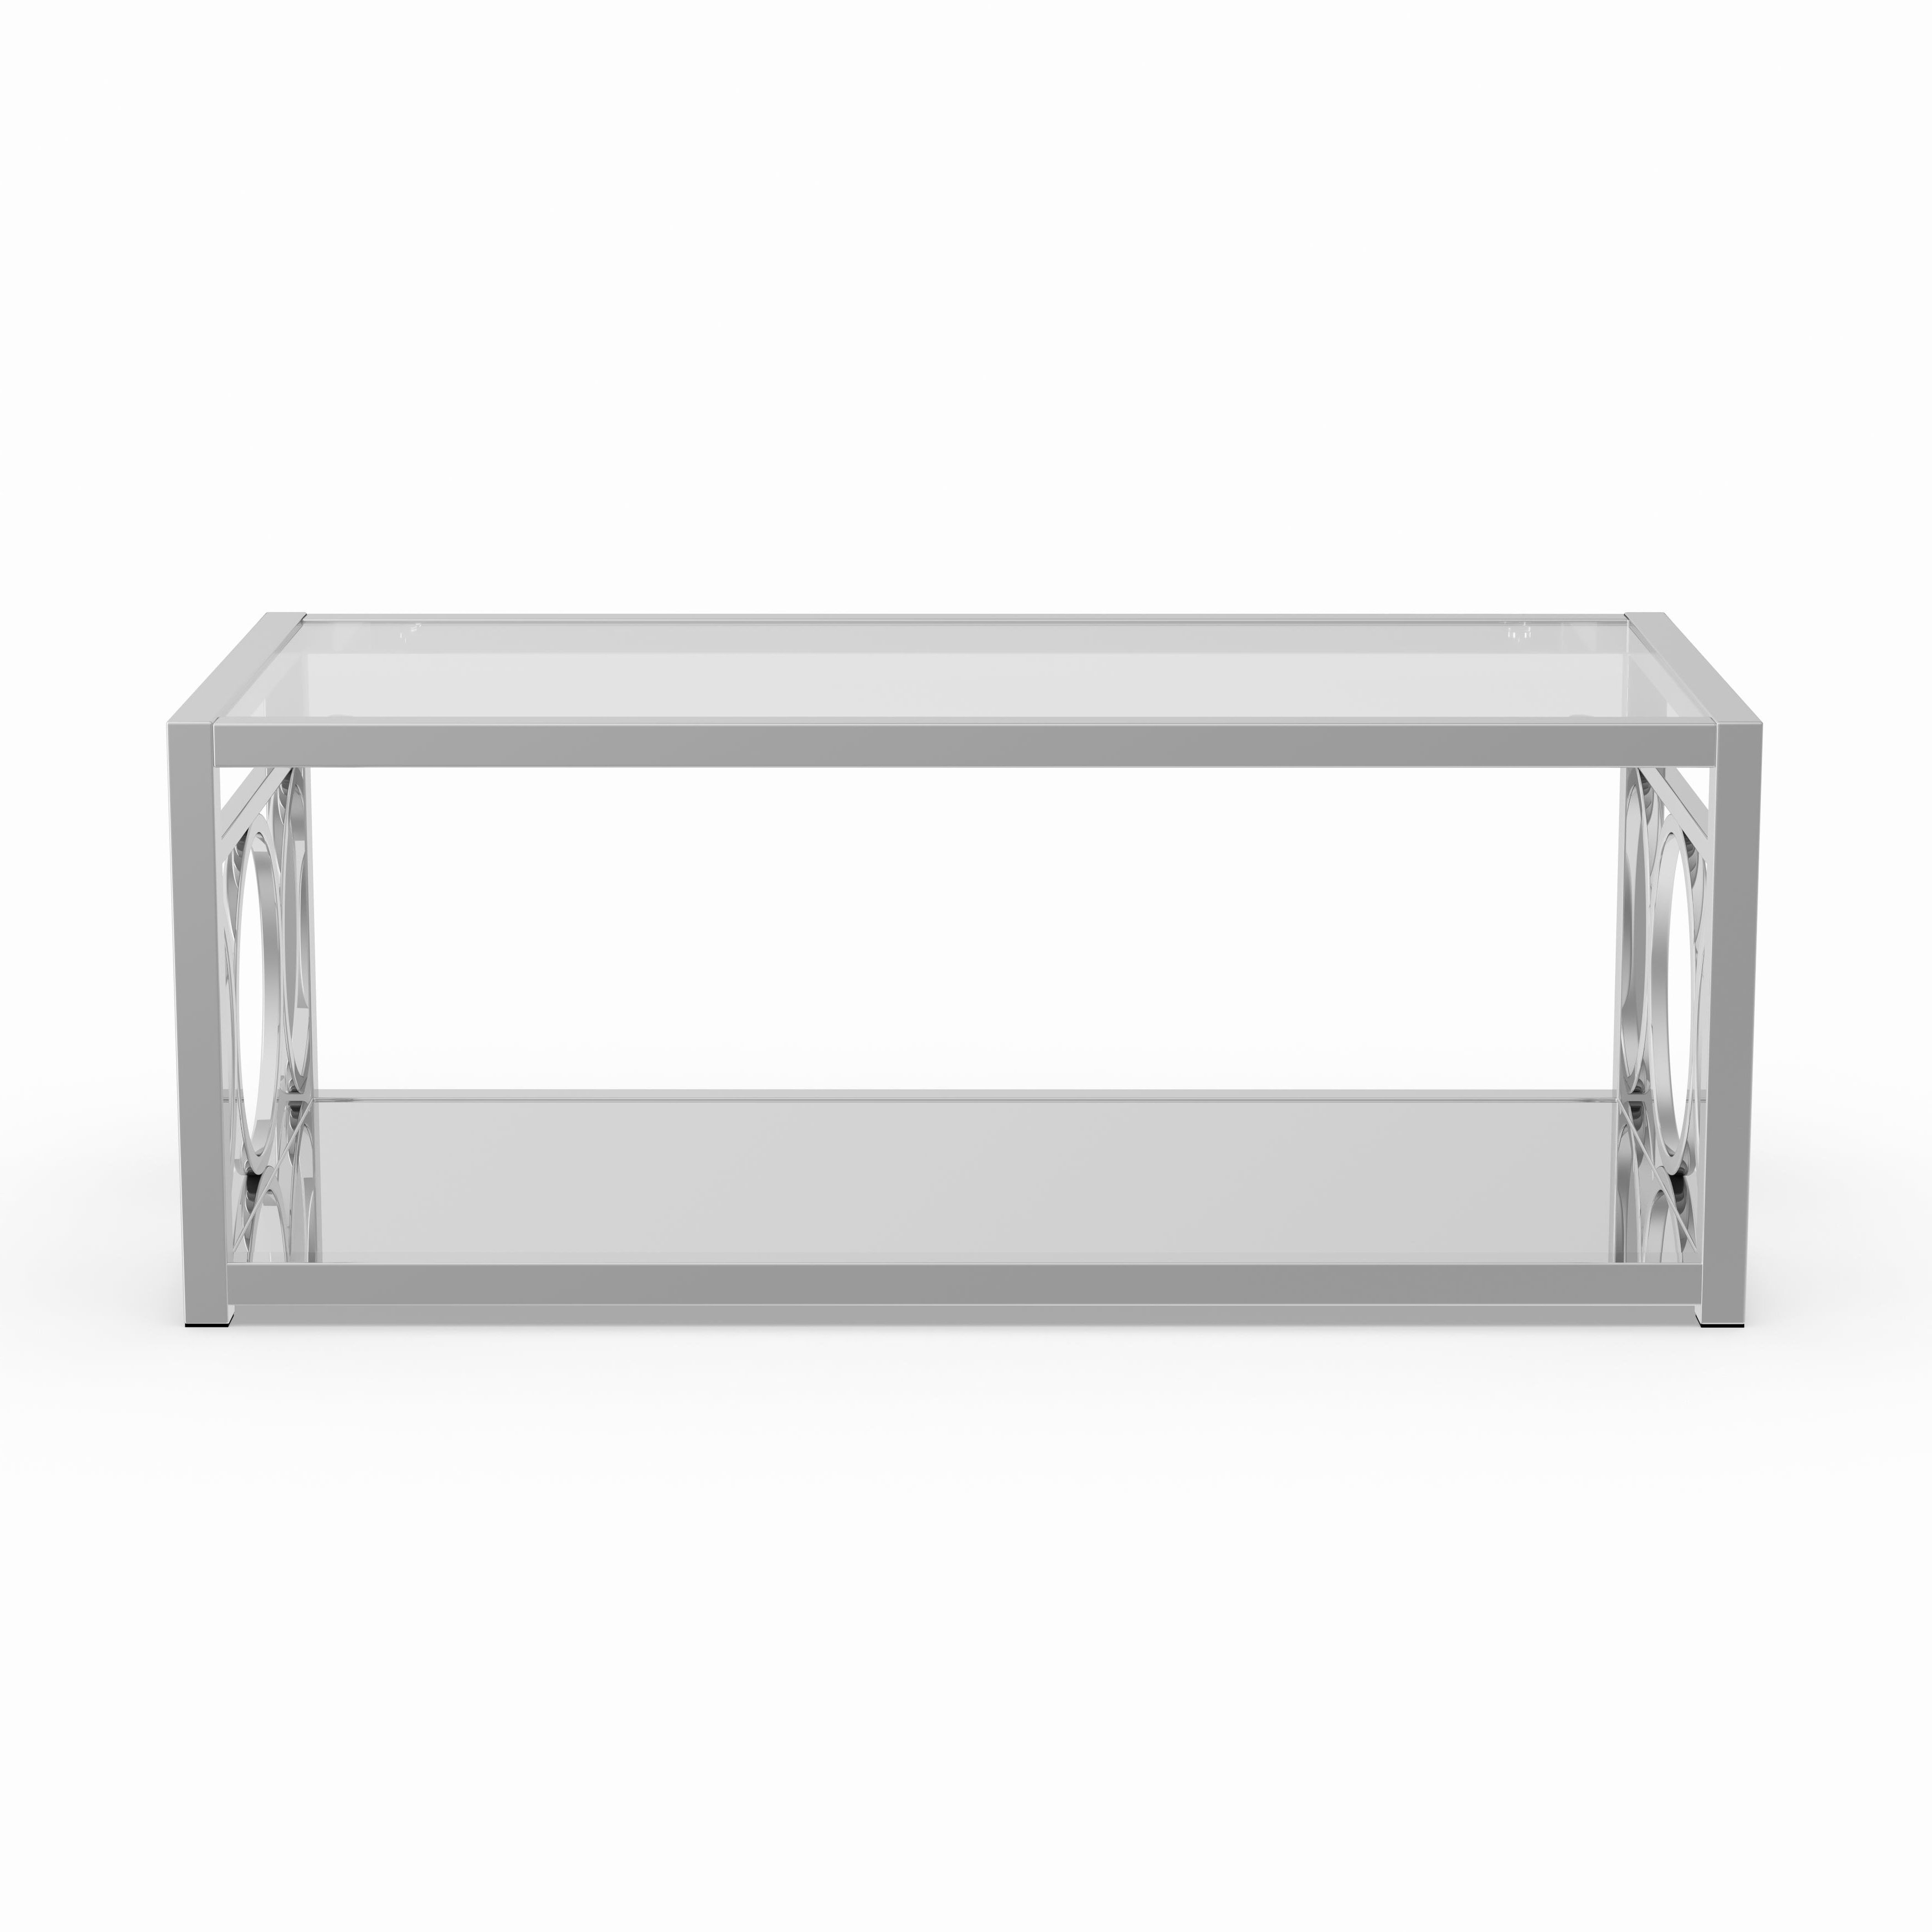 Silver Orchid Ipsen Contemporary Glass Top Coffee Table Throughout Current Silver Orchid Ipsen Contemporary Glass Top Coffee Tables (View 5 of 20)